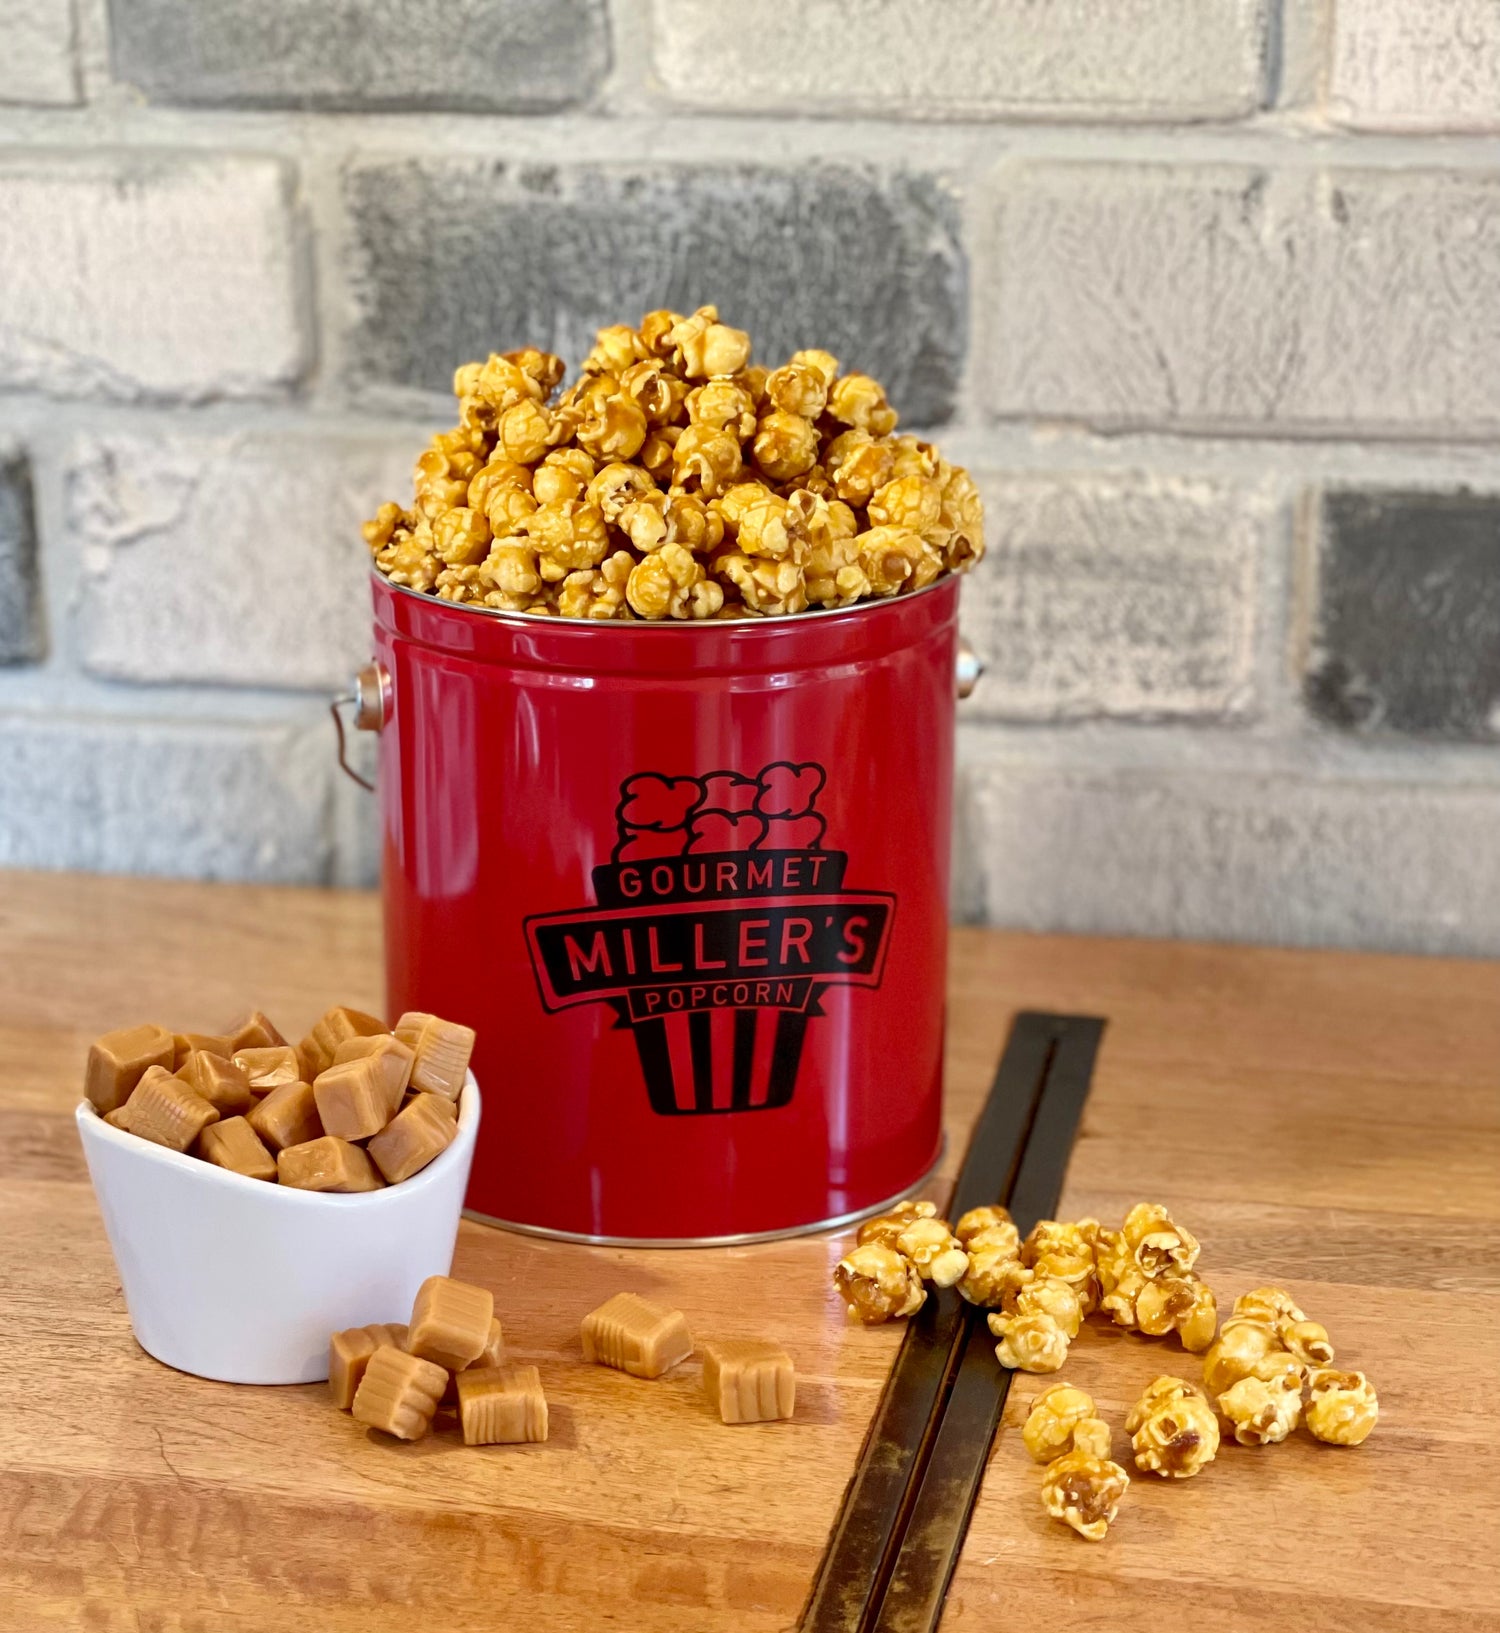 Miller Theatres - Our So Fetch Mean Girls collectible merch is now  available! Snag our metal popcorn buckets and pink glitter cups when you  watch Mean Girls at Miller Theatres - first